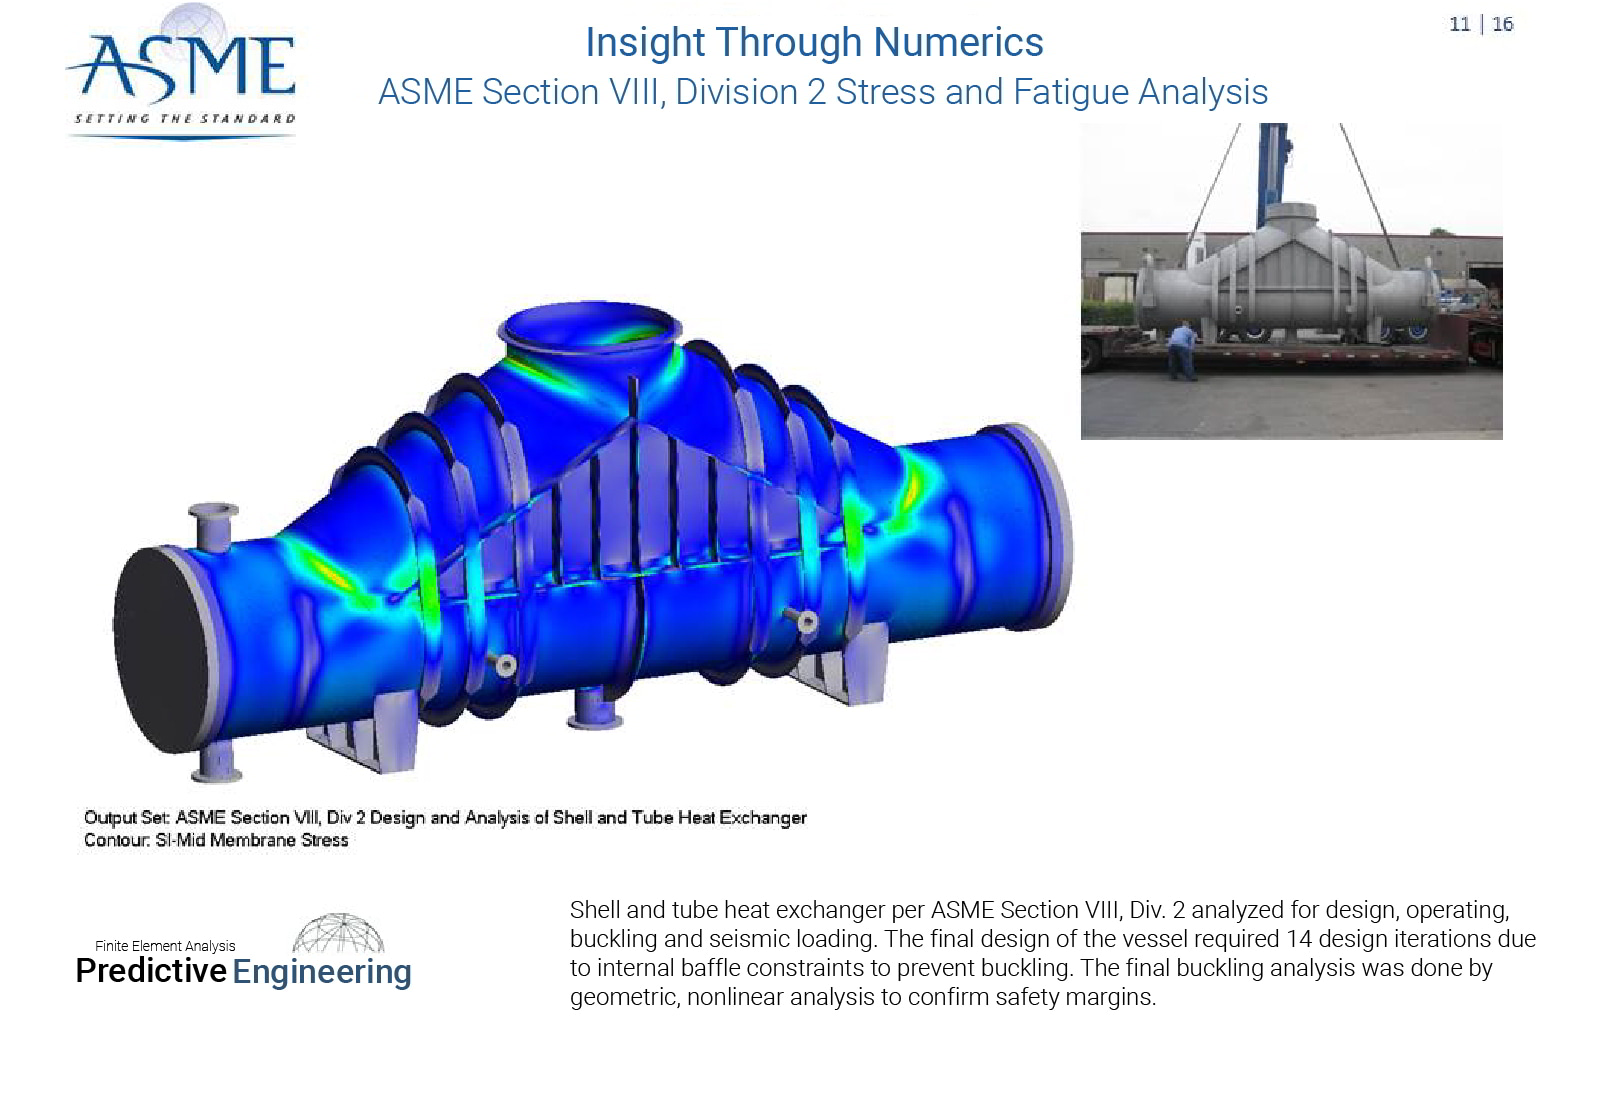 Shell and tube heat exchanger per ASME Section VIII, Div. 2 analyzed for design, operating, buckling and seismic loading - - Predictive Engineering ASME BPVC Pressure Vessel Consulting Services